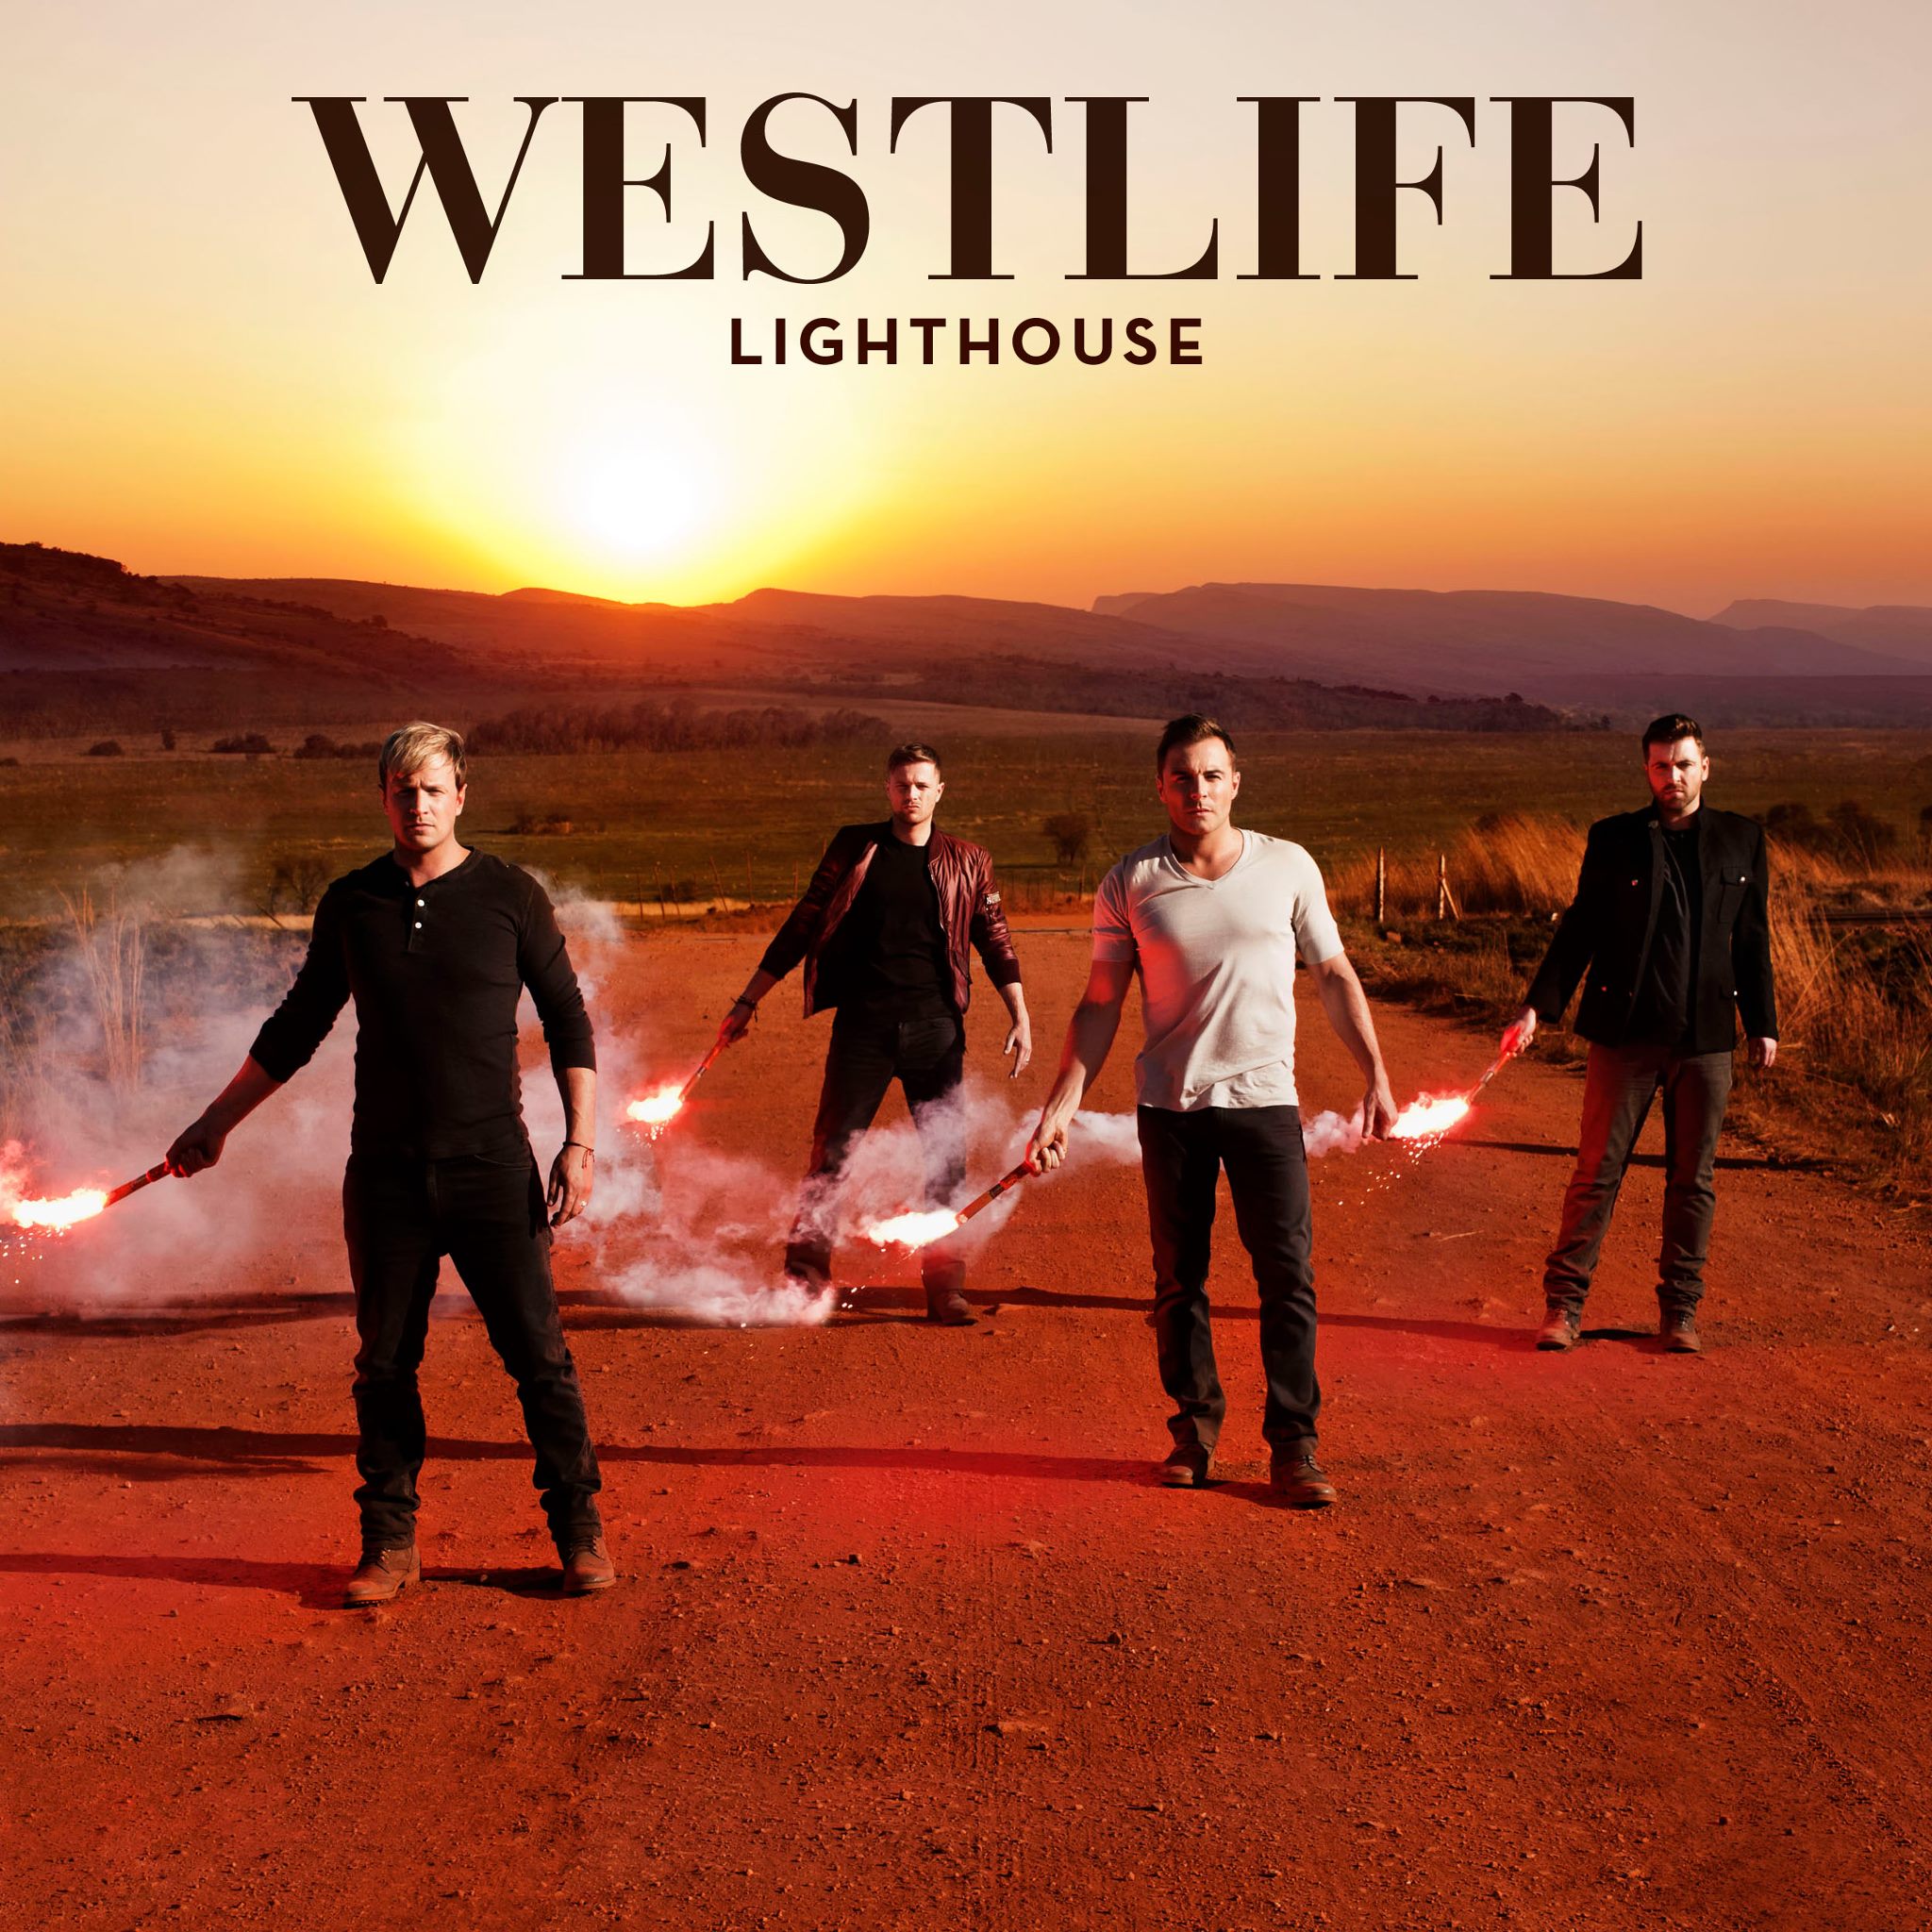 Face to Face (Westlife album) - Wikipedia